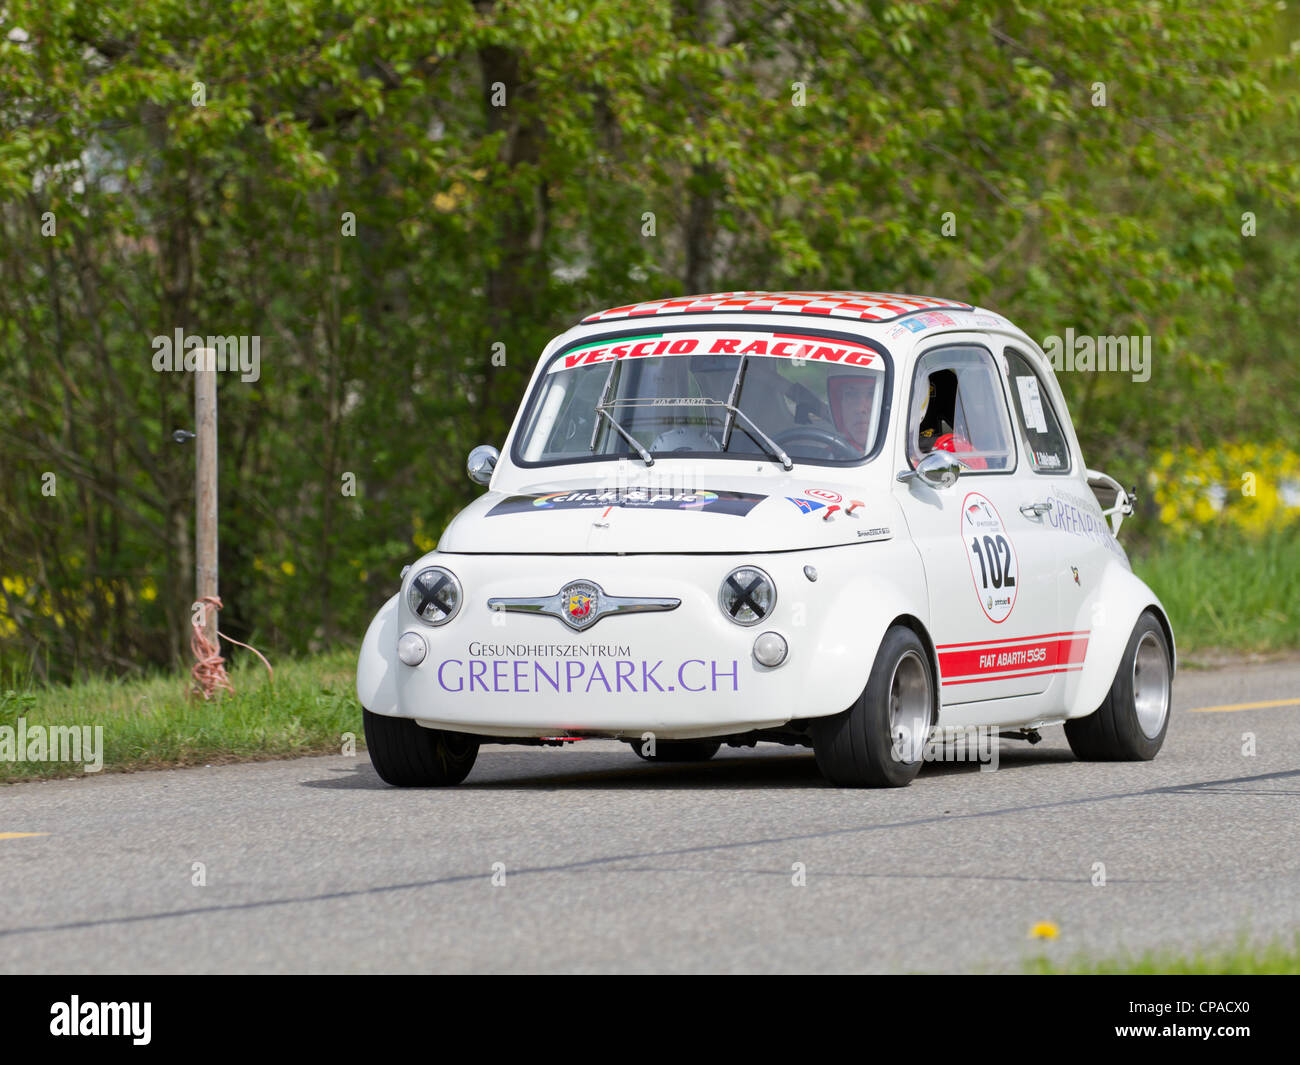 Vintage race touring car Fiat Abarth 595 from 1965 at Grand Prix in Mutschellen, SUI on April 29, 2012. Stock Photo